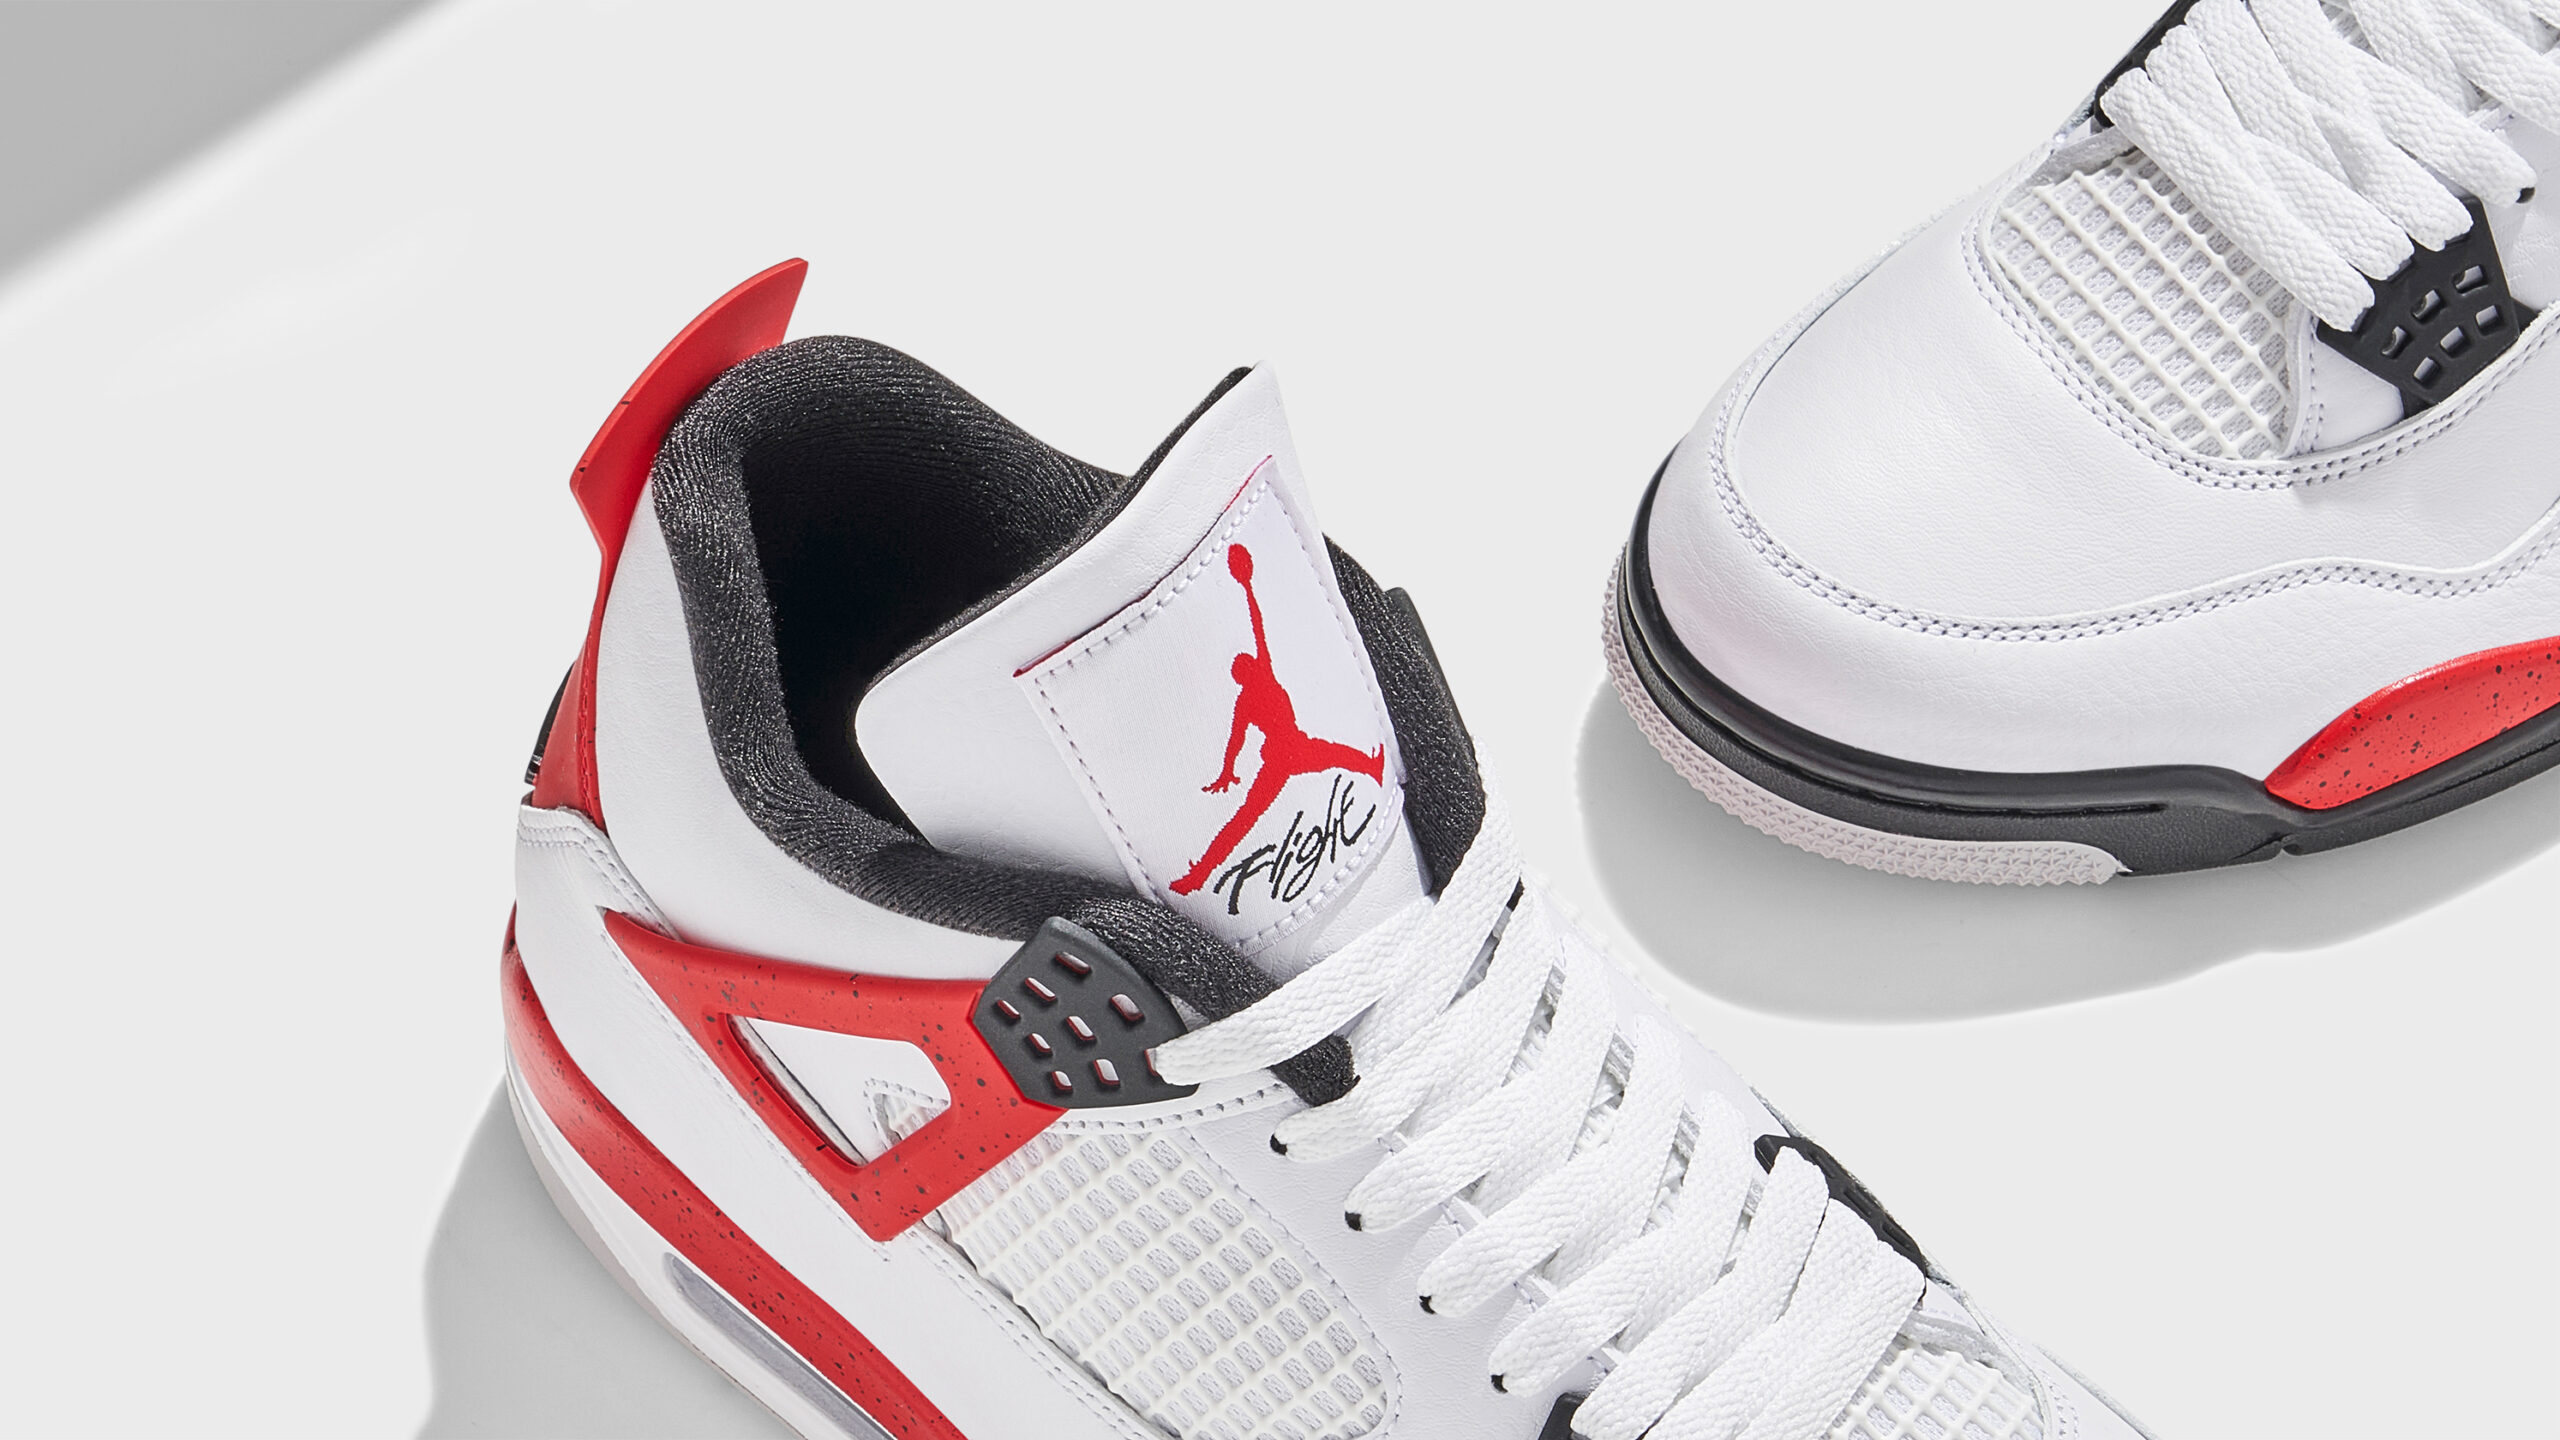 A First Look At The Air Jordan 4 Retro Red Cement